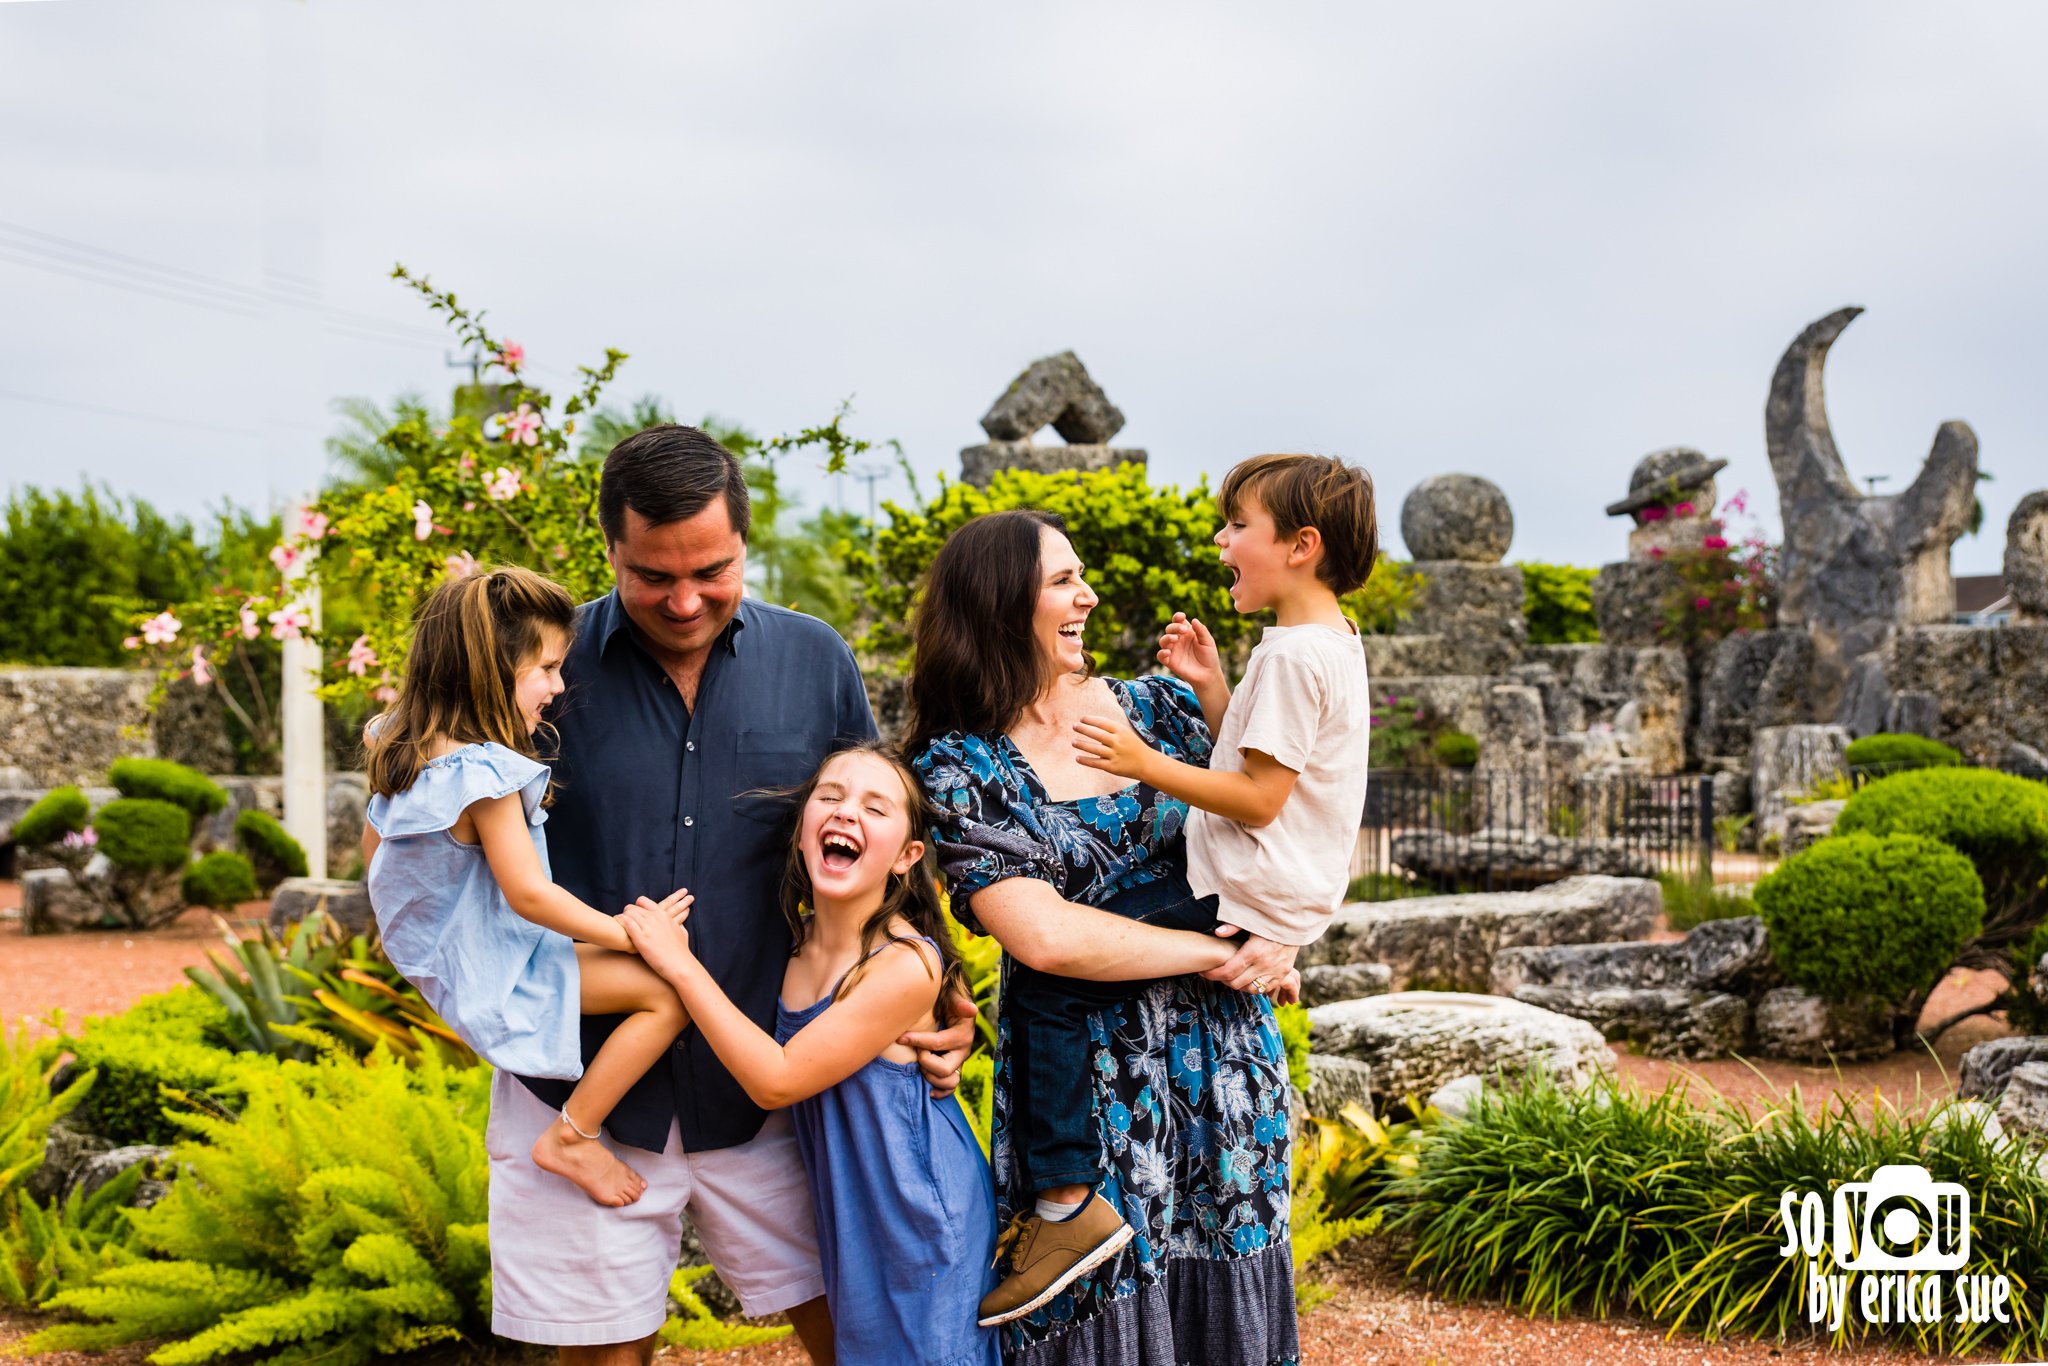 17-lifestyle-family-photographer-coral-castle-miami-fl-so-you-by-erica-sue-ES2_9347-Edit.jpg